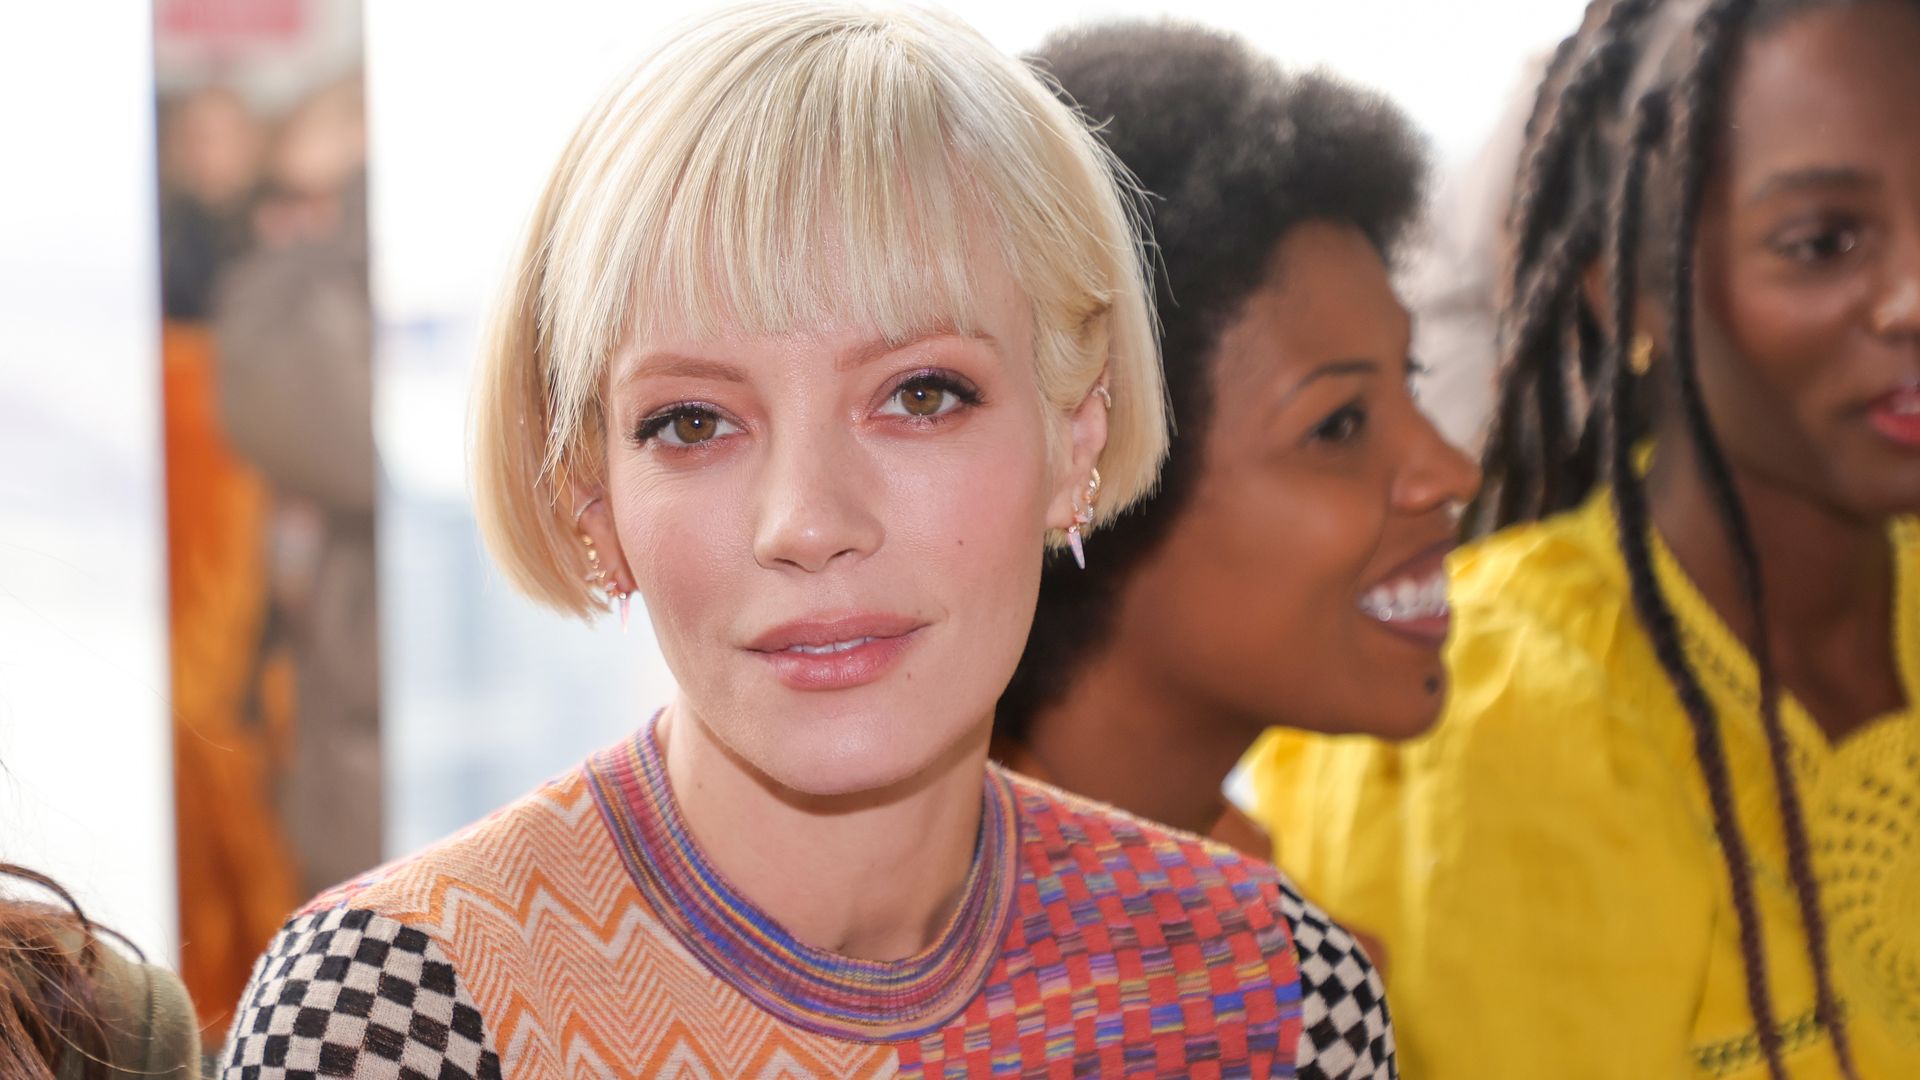 Lily Allen attends the Ulla Johnson show during New York Fashion Week